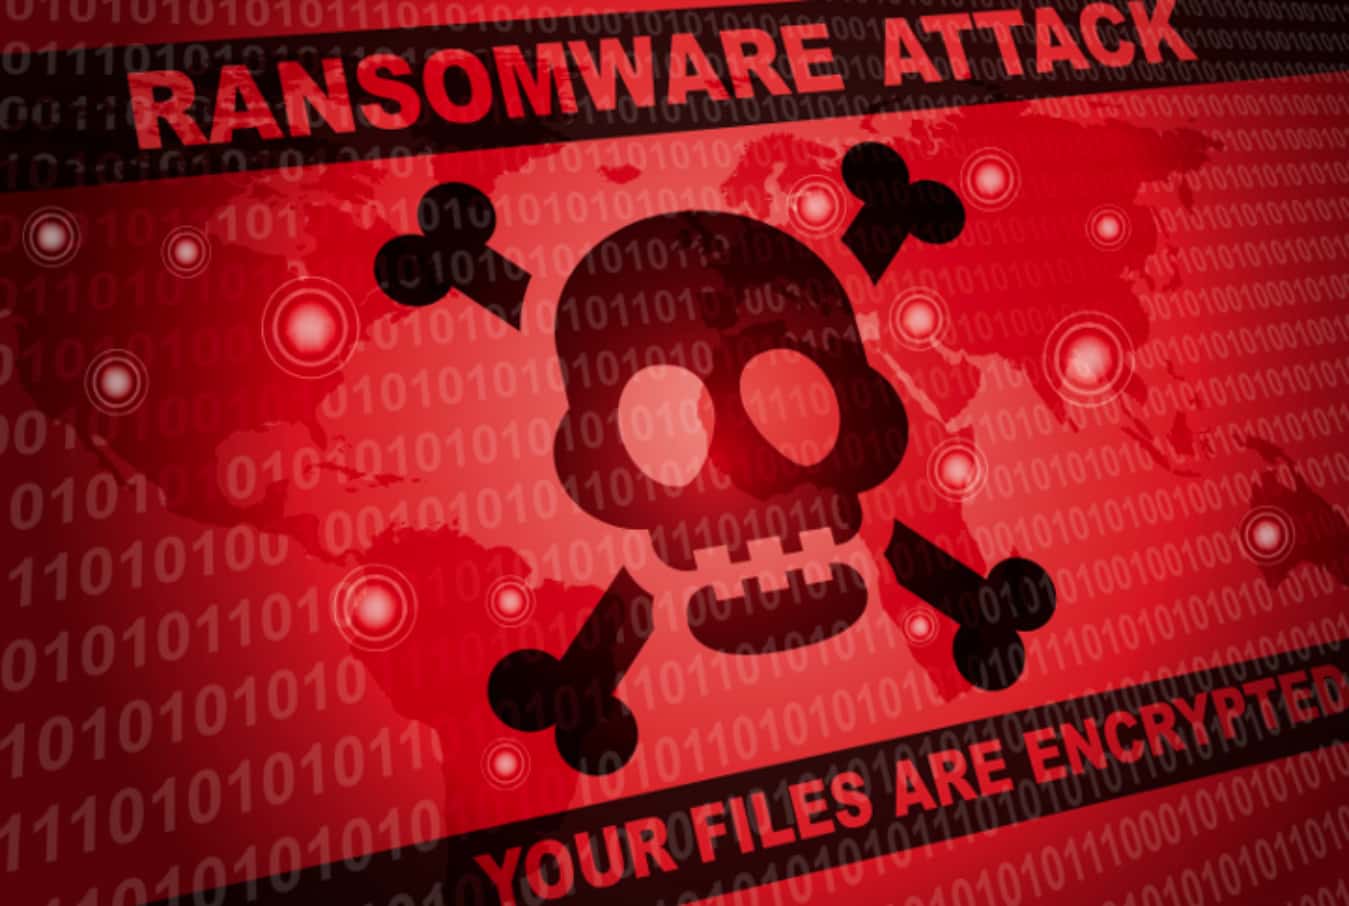 New malware mimics Windows scanner to infect PCs with ransomware